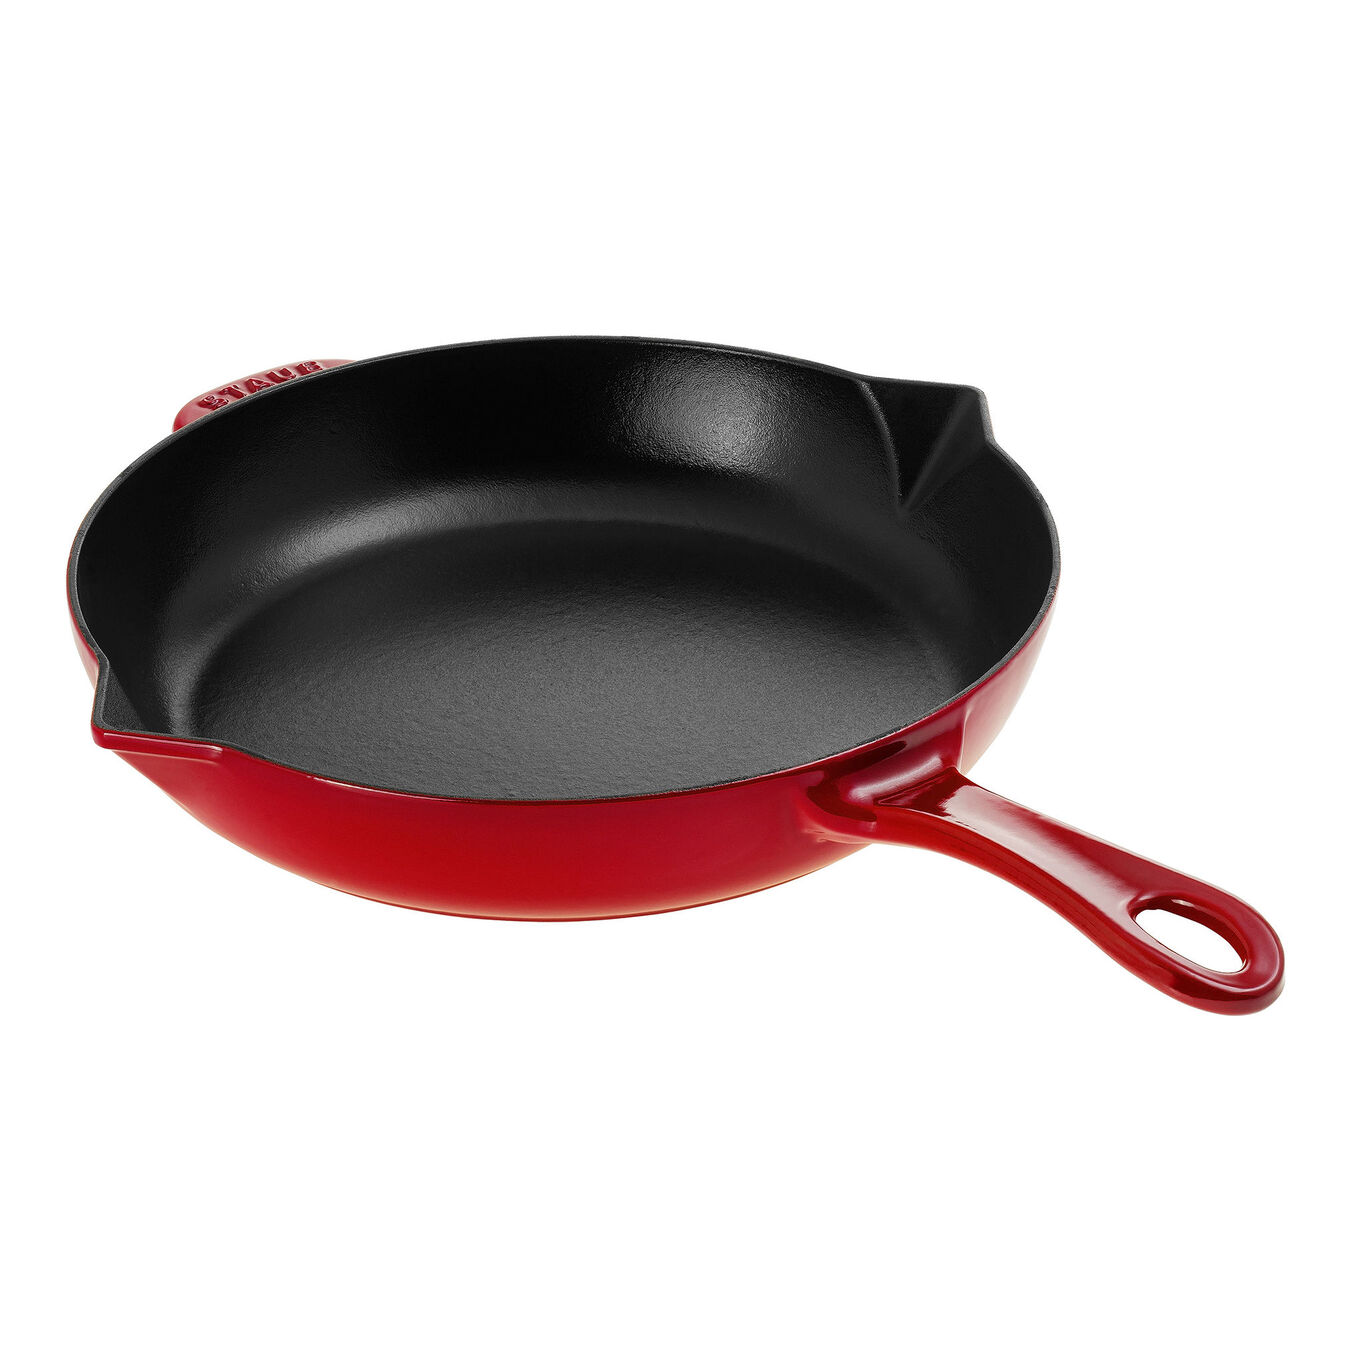 26 cm / 10 inch cast iron Frying pan with pouring spout, cherry,,large 2